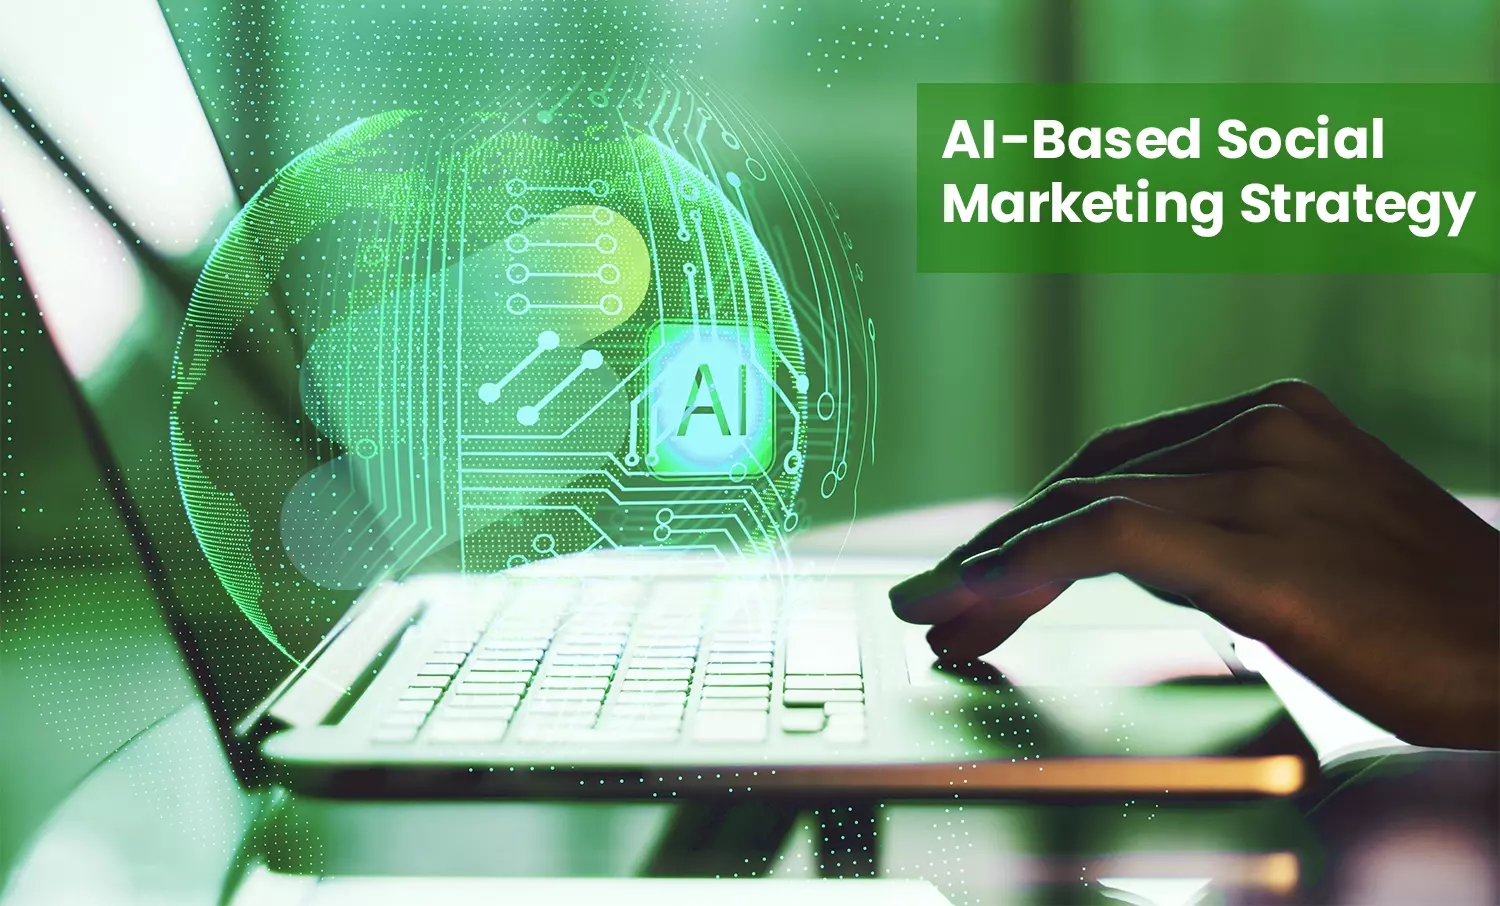 A Practical Guide To Articulating An AI-Based Social Marketing Strategy